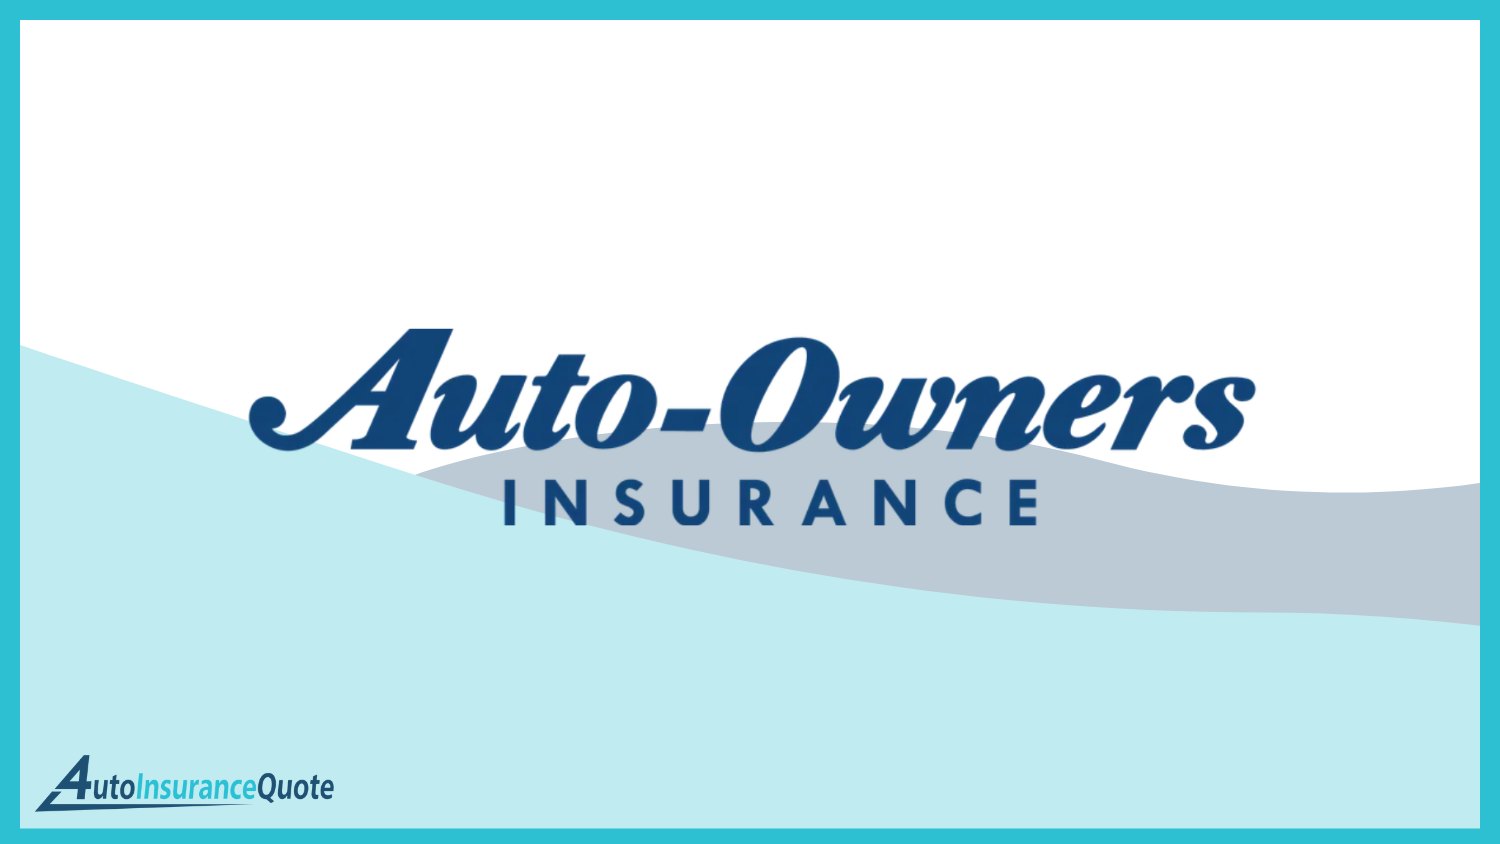 Auto-Owners: Cheap Auto Insurance for Medicaid Recipients